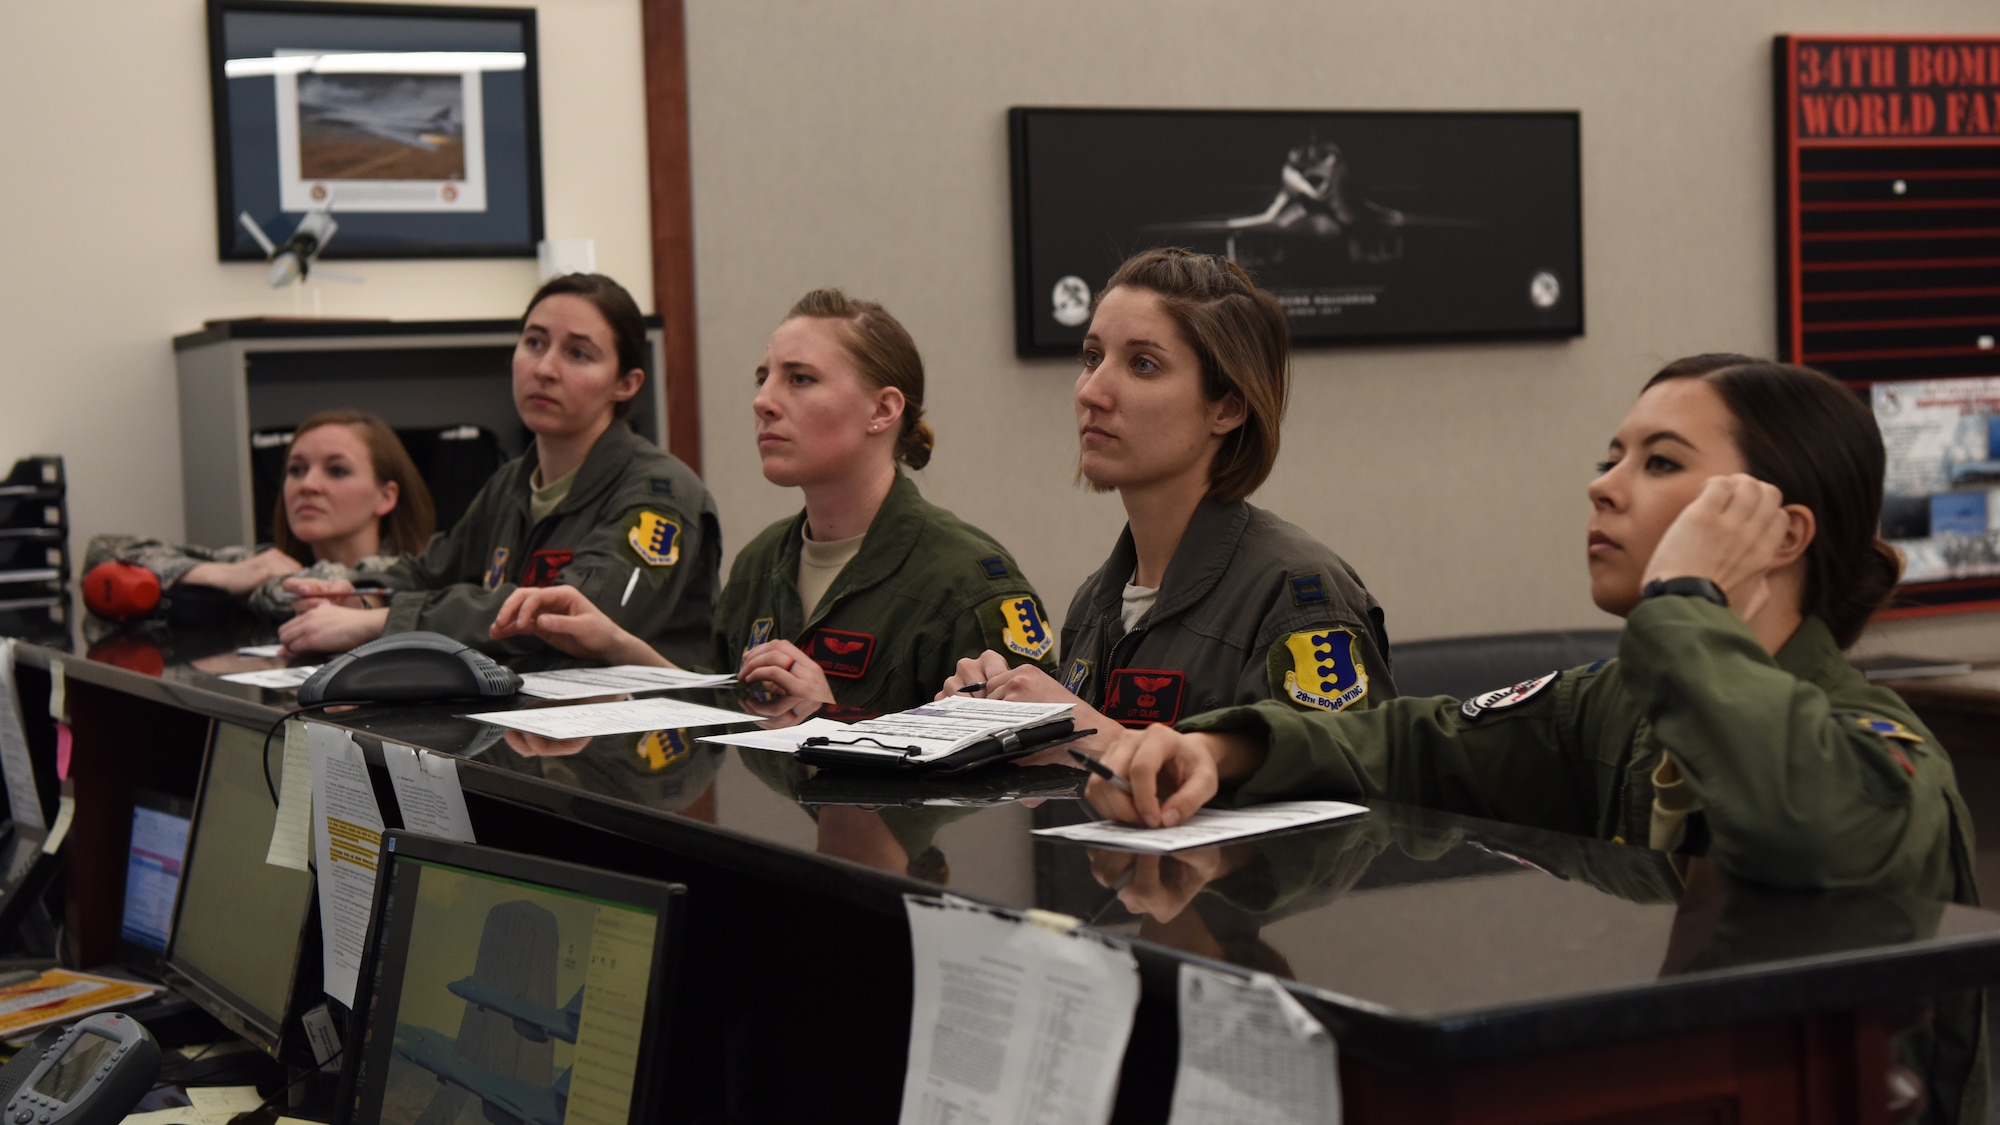 Capt. Lacey Koelling, the 34th Aircraft Maintenance Unit officer in charge, and 34th Bomb Squadron members Capt. Lillian Pryor, a B-1 pilot; Capt. Danielle Zidack, a weapon systems officer; Capt. Lauren Olme, a B-1 pilot; and 1st Lt. Kimberly Auton, a weapon systems officer, conduct a preflight briefing prior to an all-female flight out of Ellsworth Air Force Base, S.D., March 21, 2018. The flight was in honor of Women’s History Month and consisted of routine training in the local area. (U.S. Air Force photo by Staff Sgt. Jette Carr)